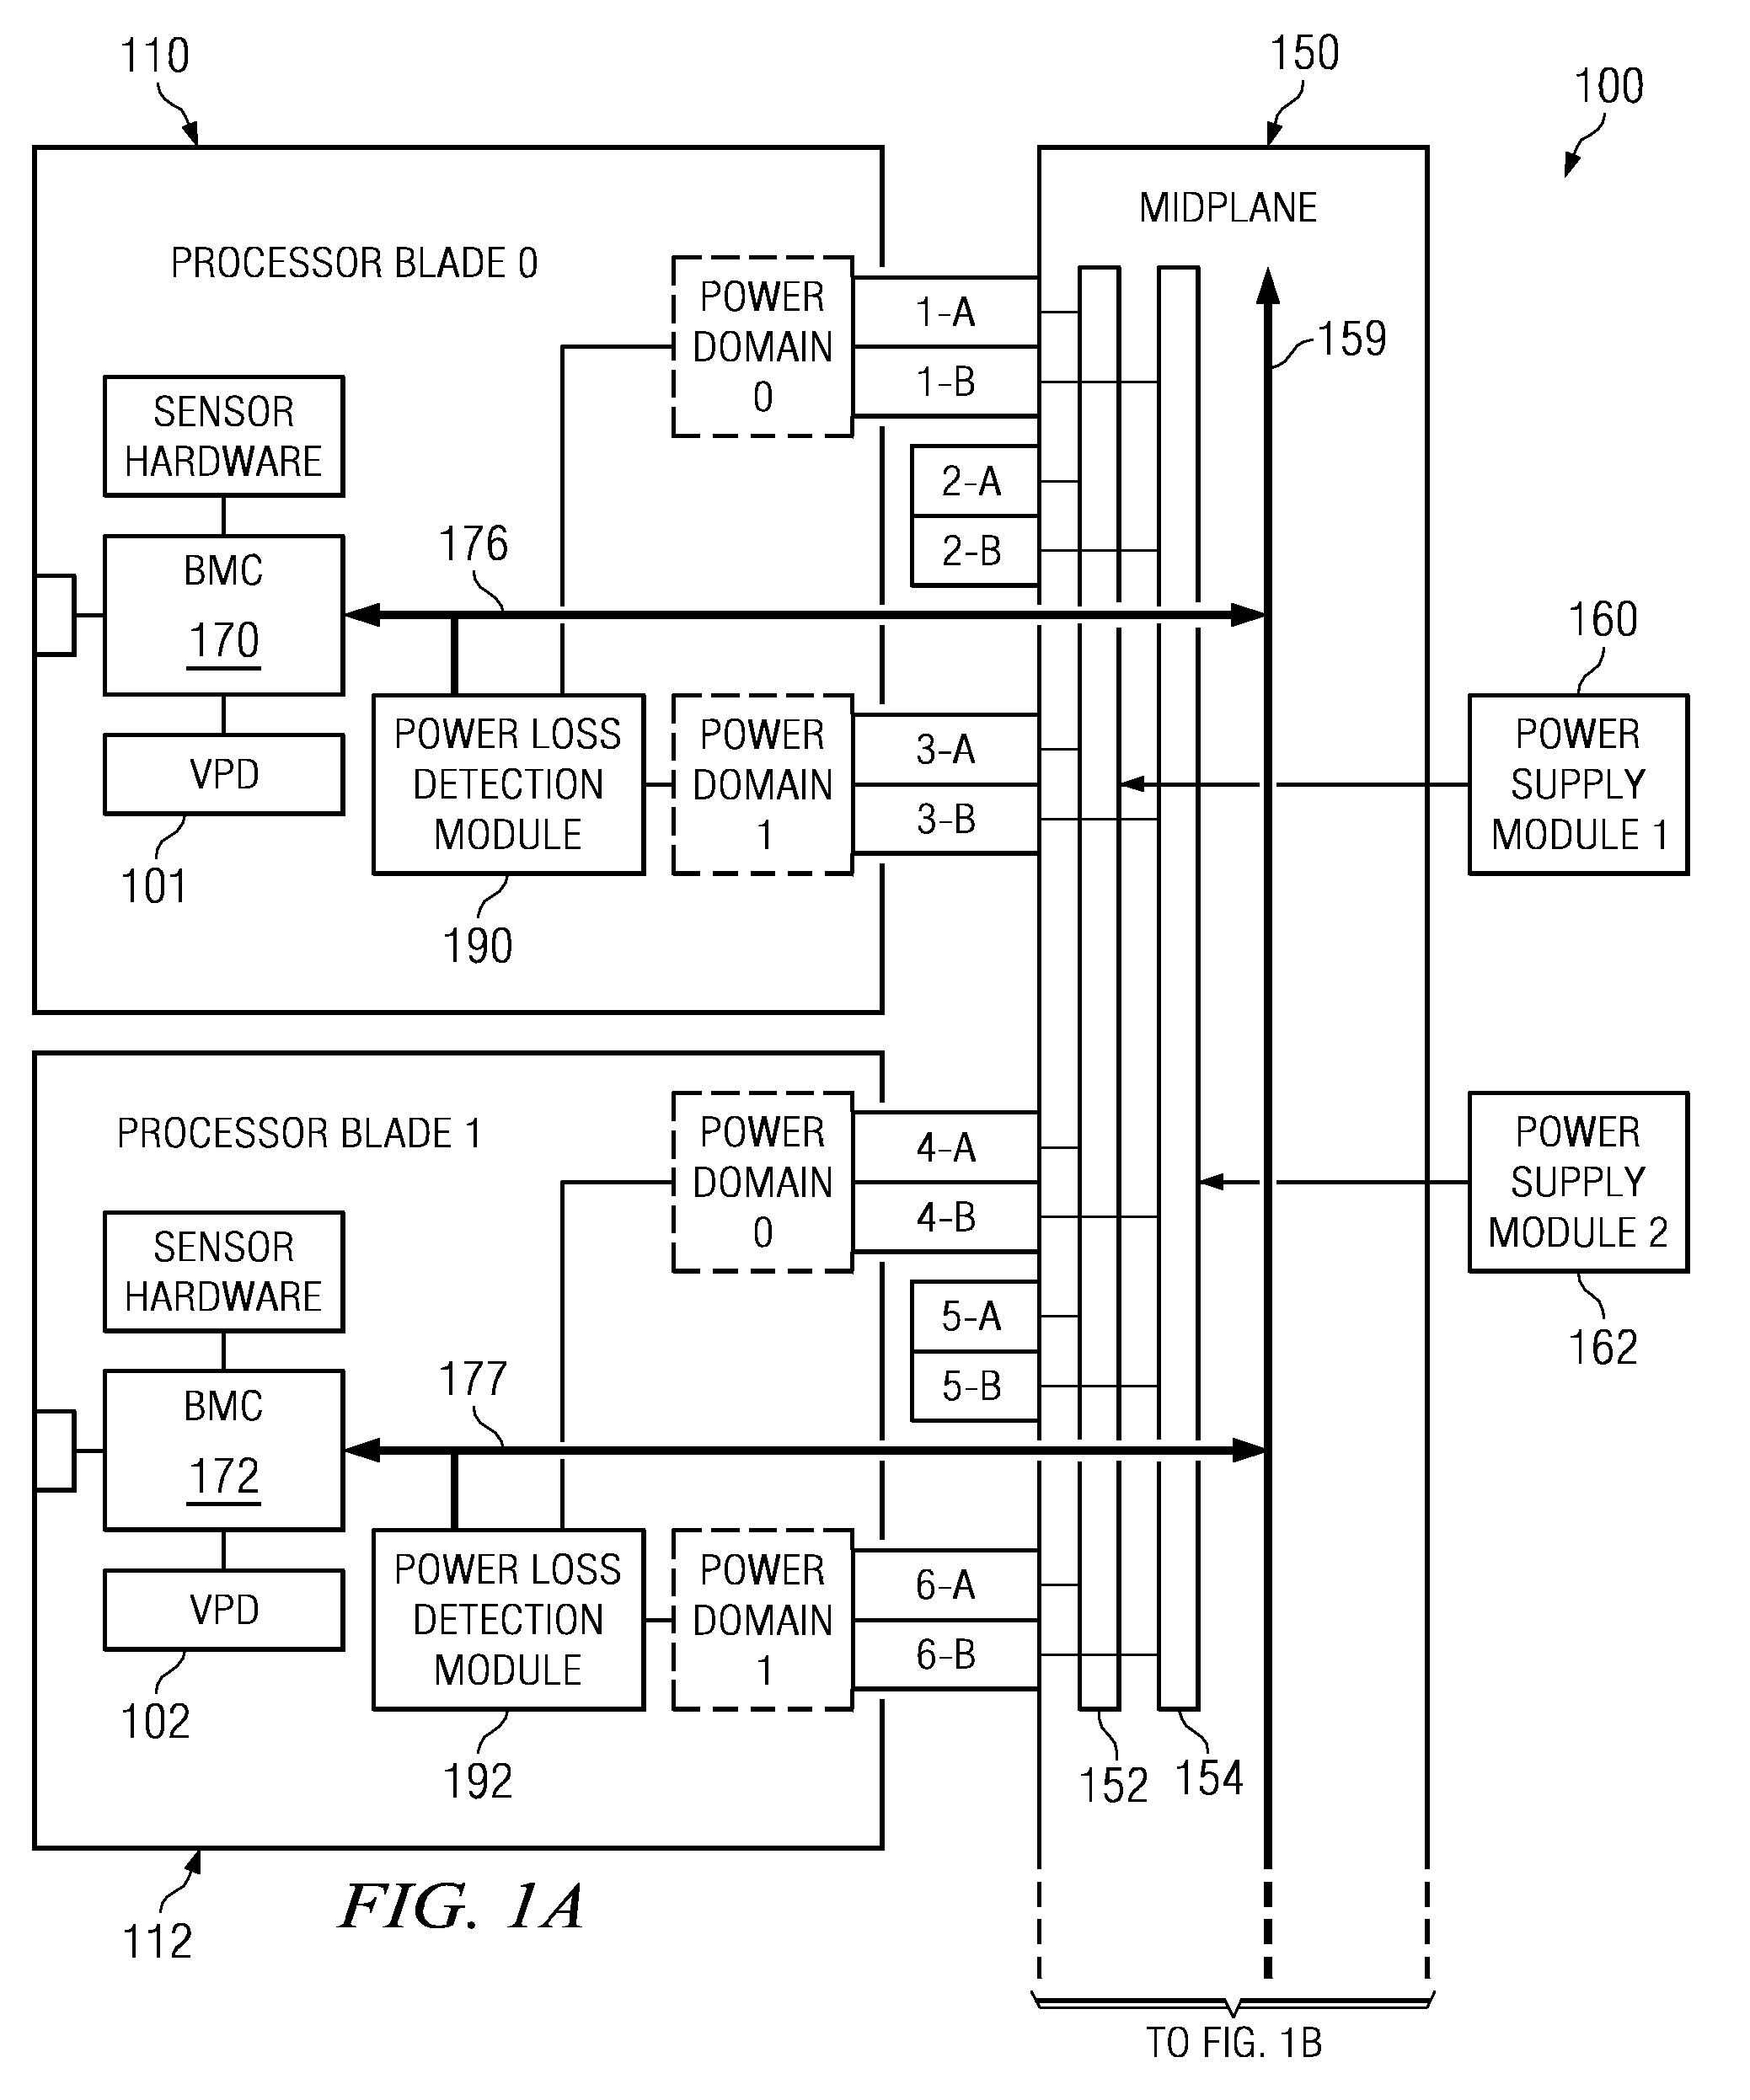 System and Method for Thresholding System Power Loss Notifications in a Data Processing System Based on Vital Product Data